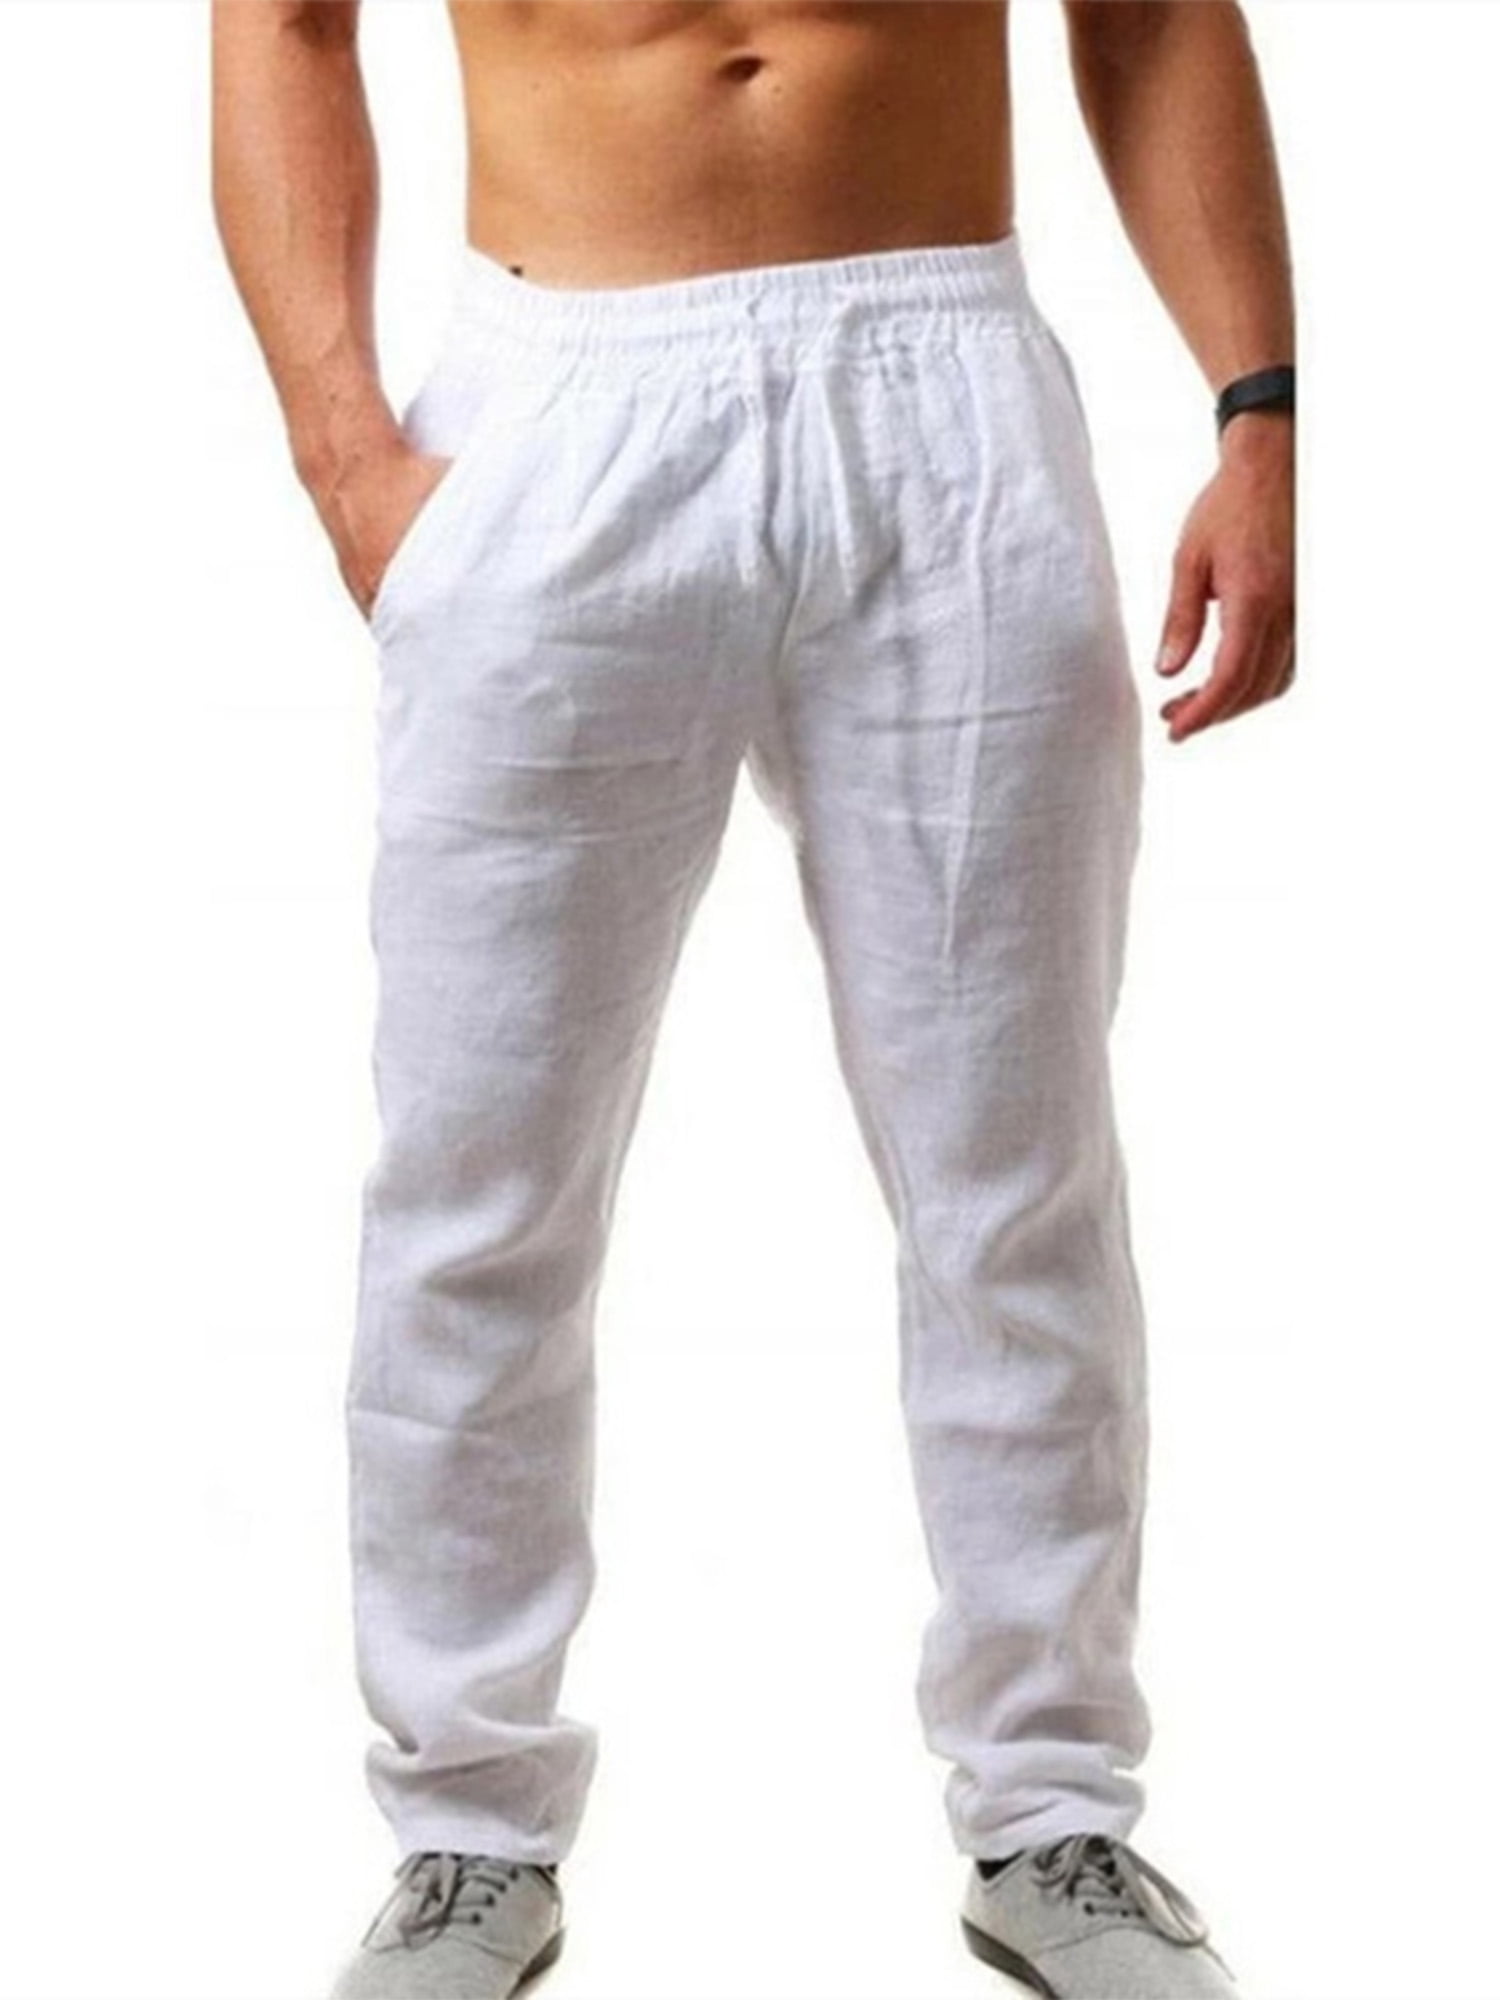 Men's Summer Cotton Linen Pants Casual Solid Loose Yoga Pants Home Trousers Fashion Sweatpants with Pocket